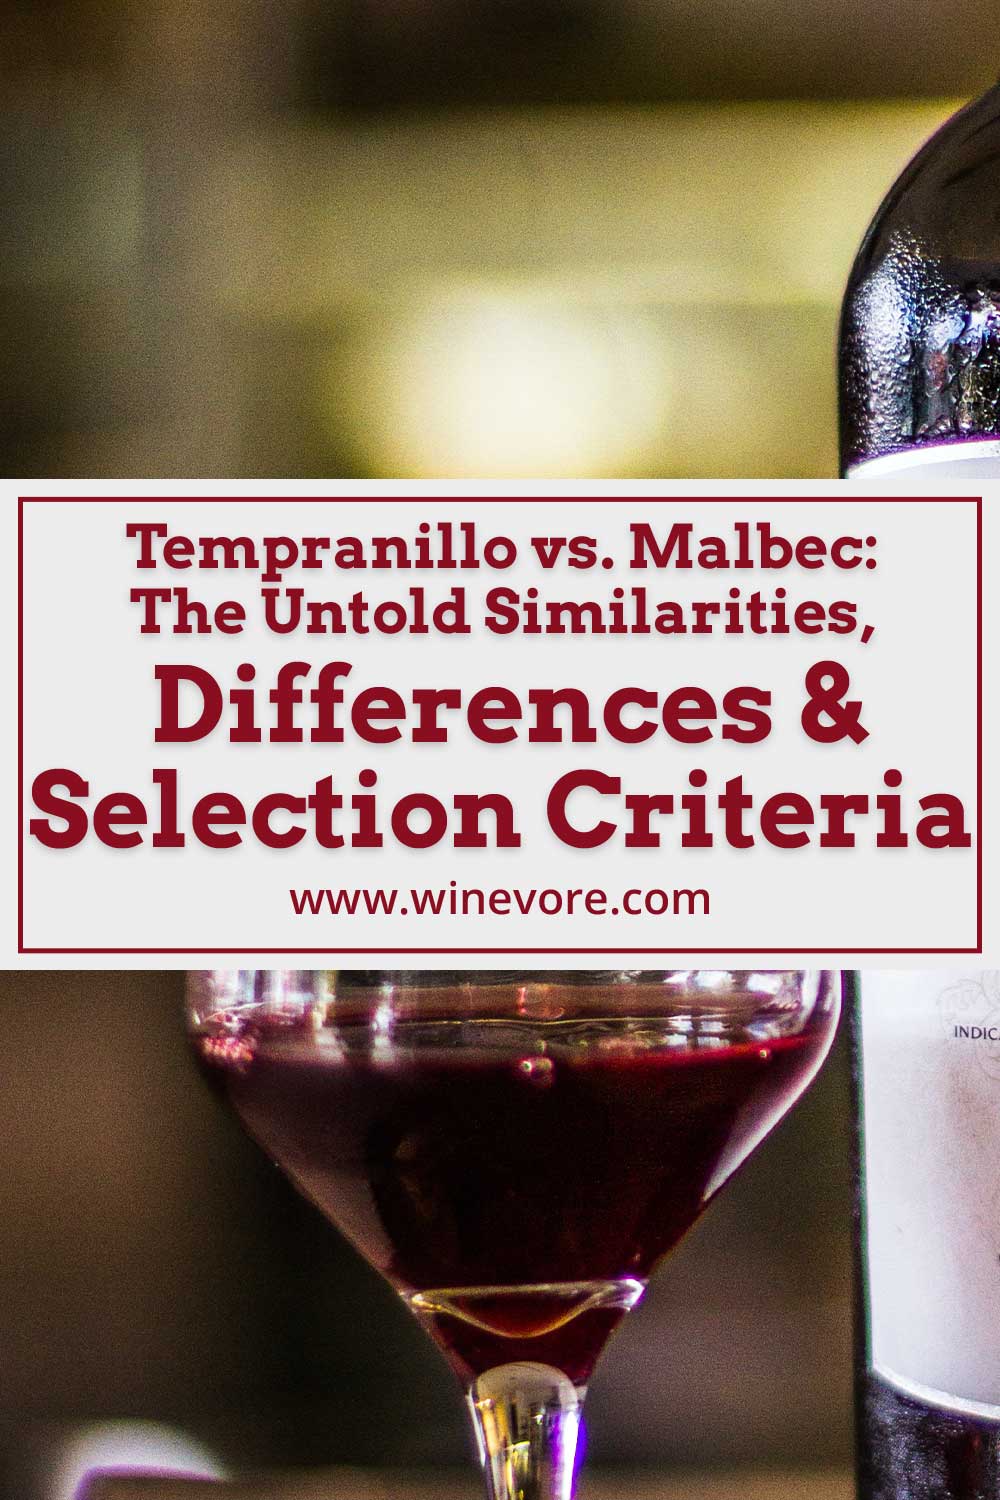 A wine glass with red wine in it near a bottle - Tempranillo vs. Malbec: Similarities, Differences & Selection Criteria